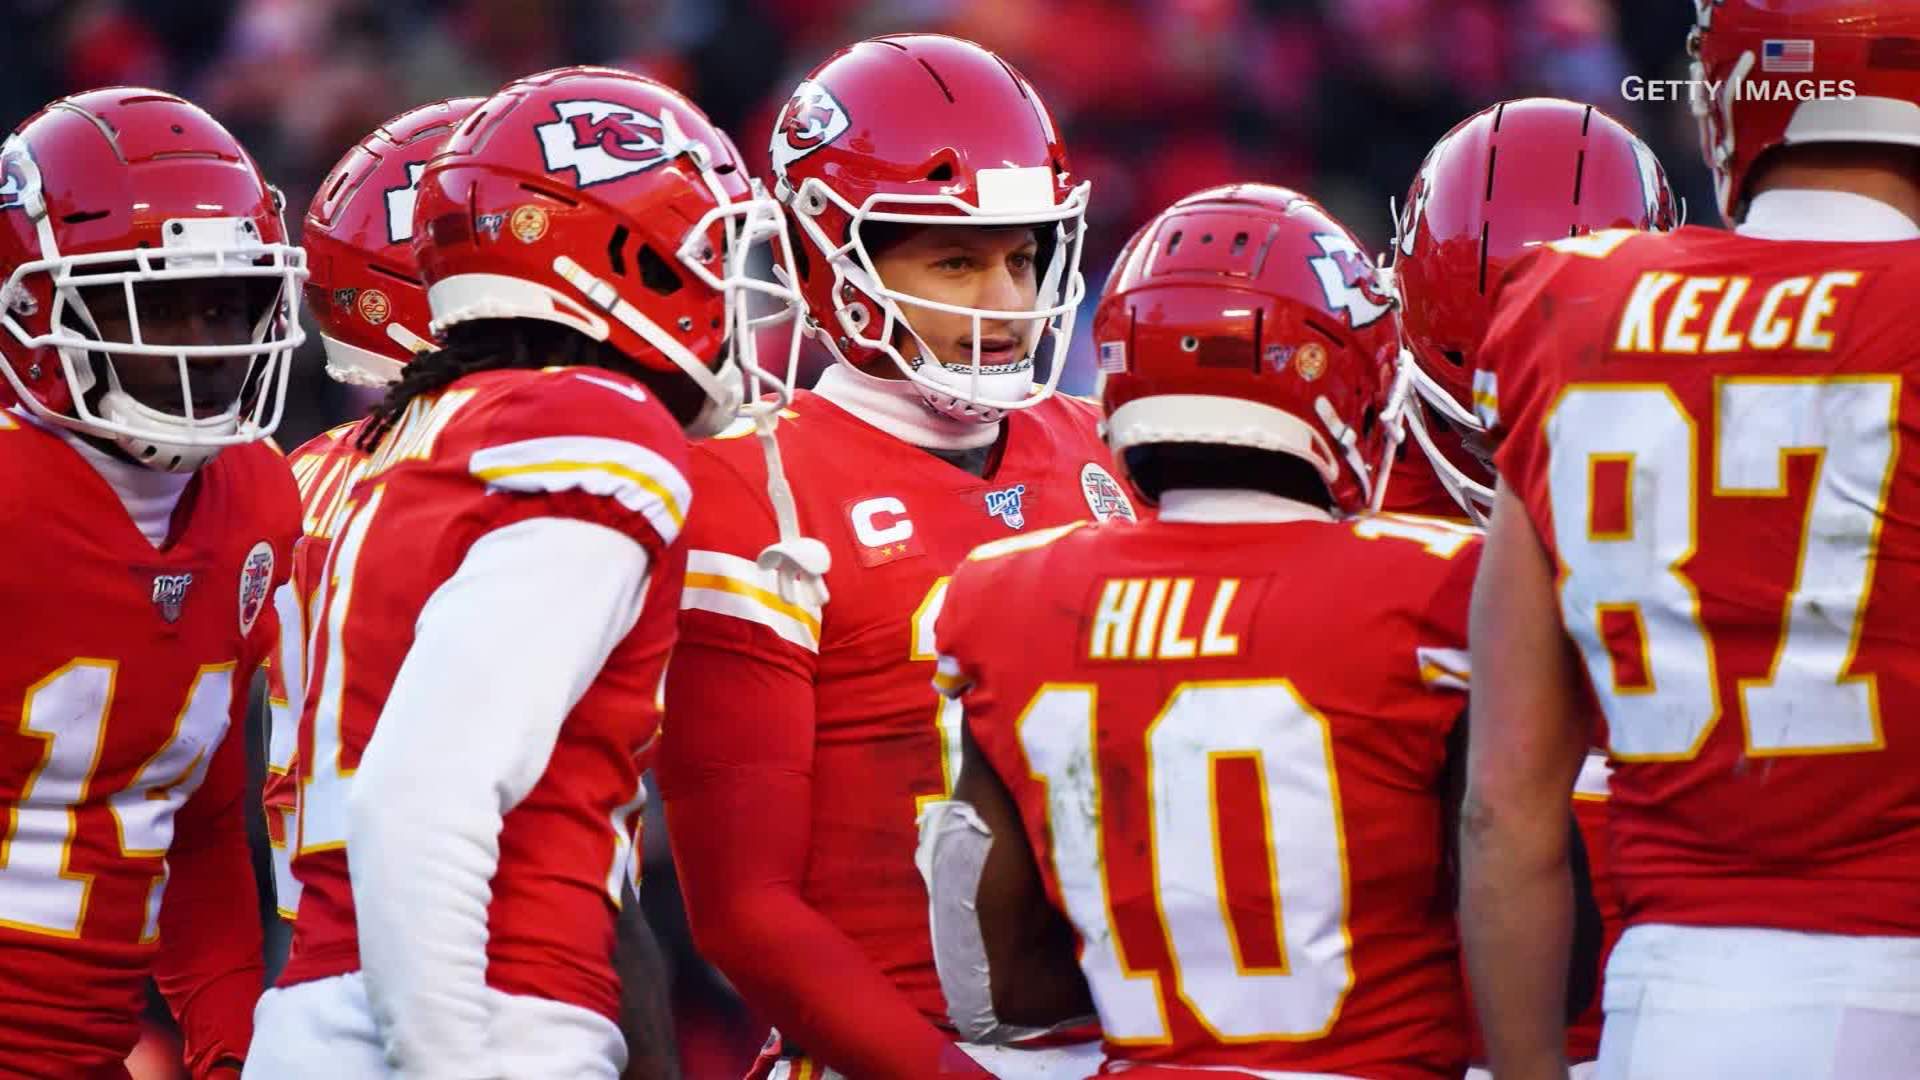 The @chiefs are wondering what you all thought of their Super Bowl